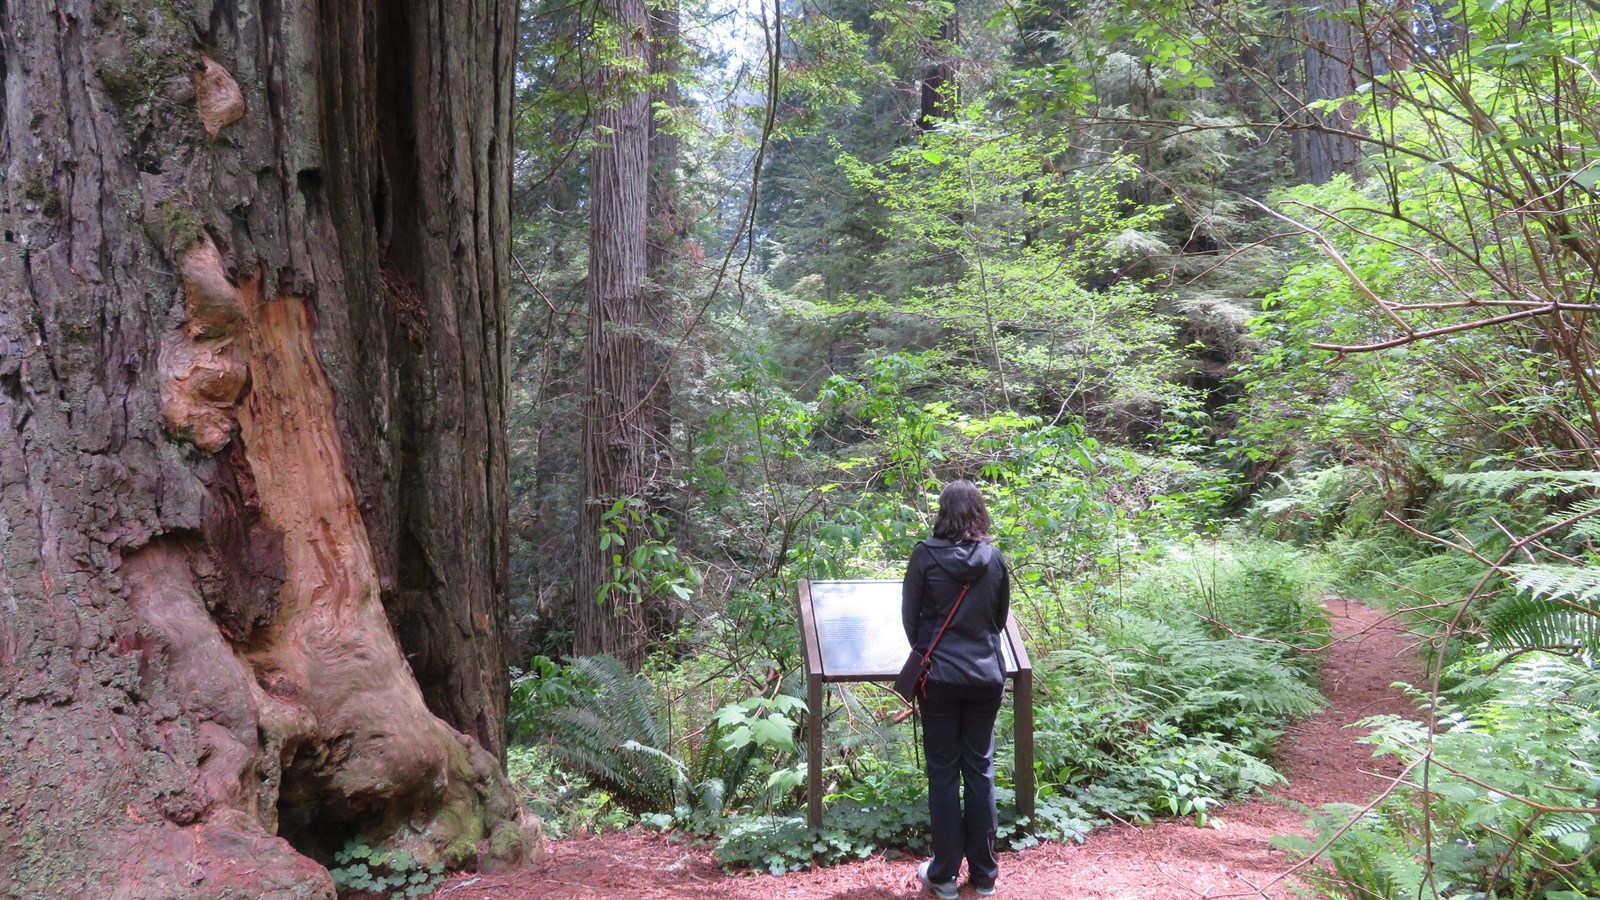 A women reads an interpretive sign on a trail surrounded by redwood trees.